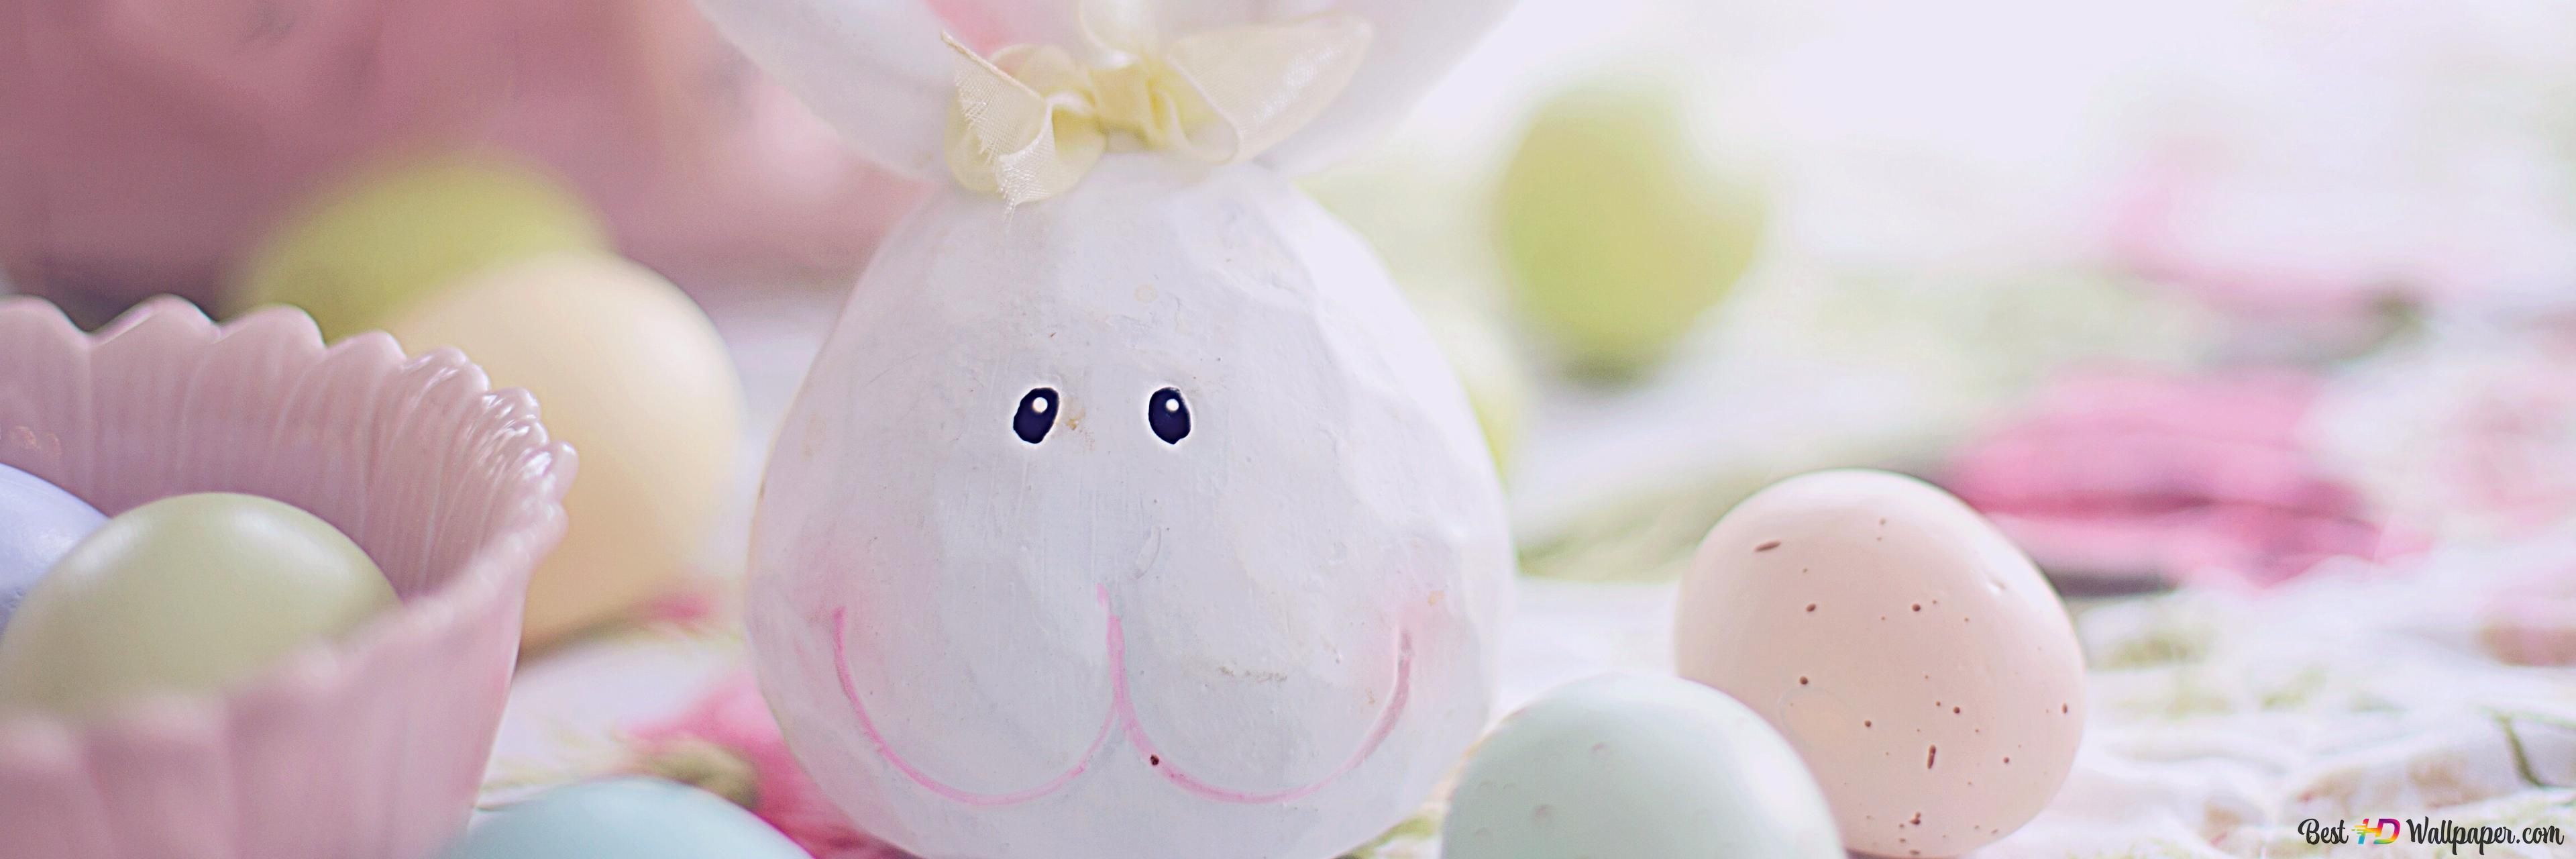 Aesthetic Eggs and bunny 4K wallpaper download